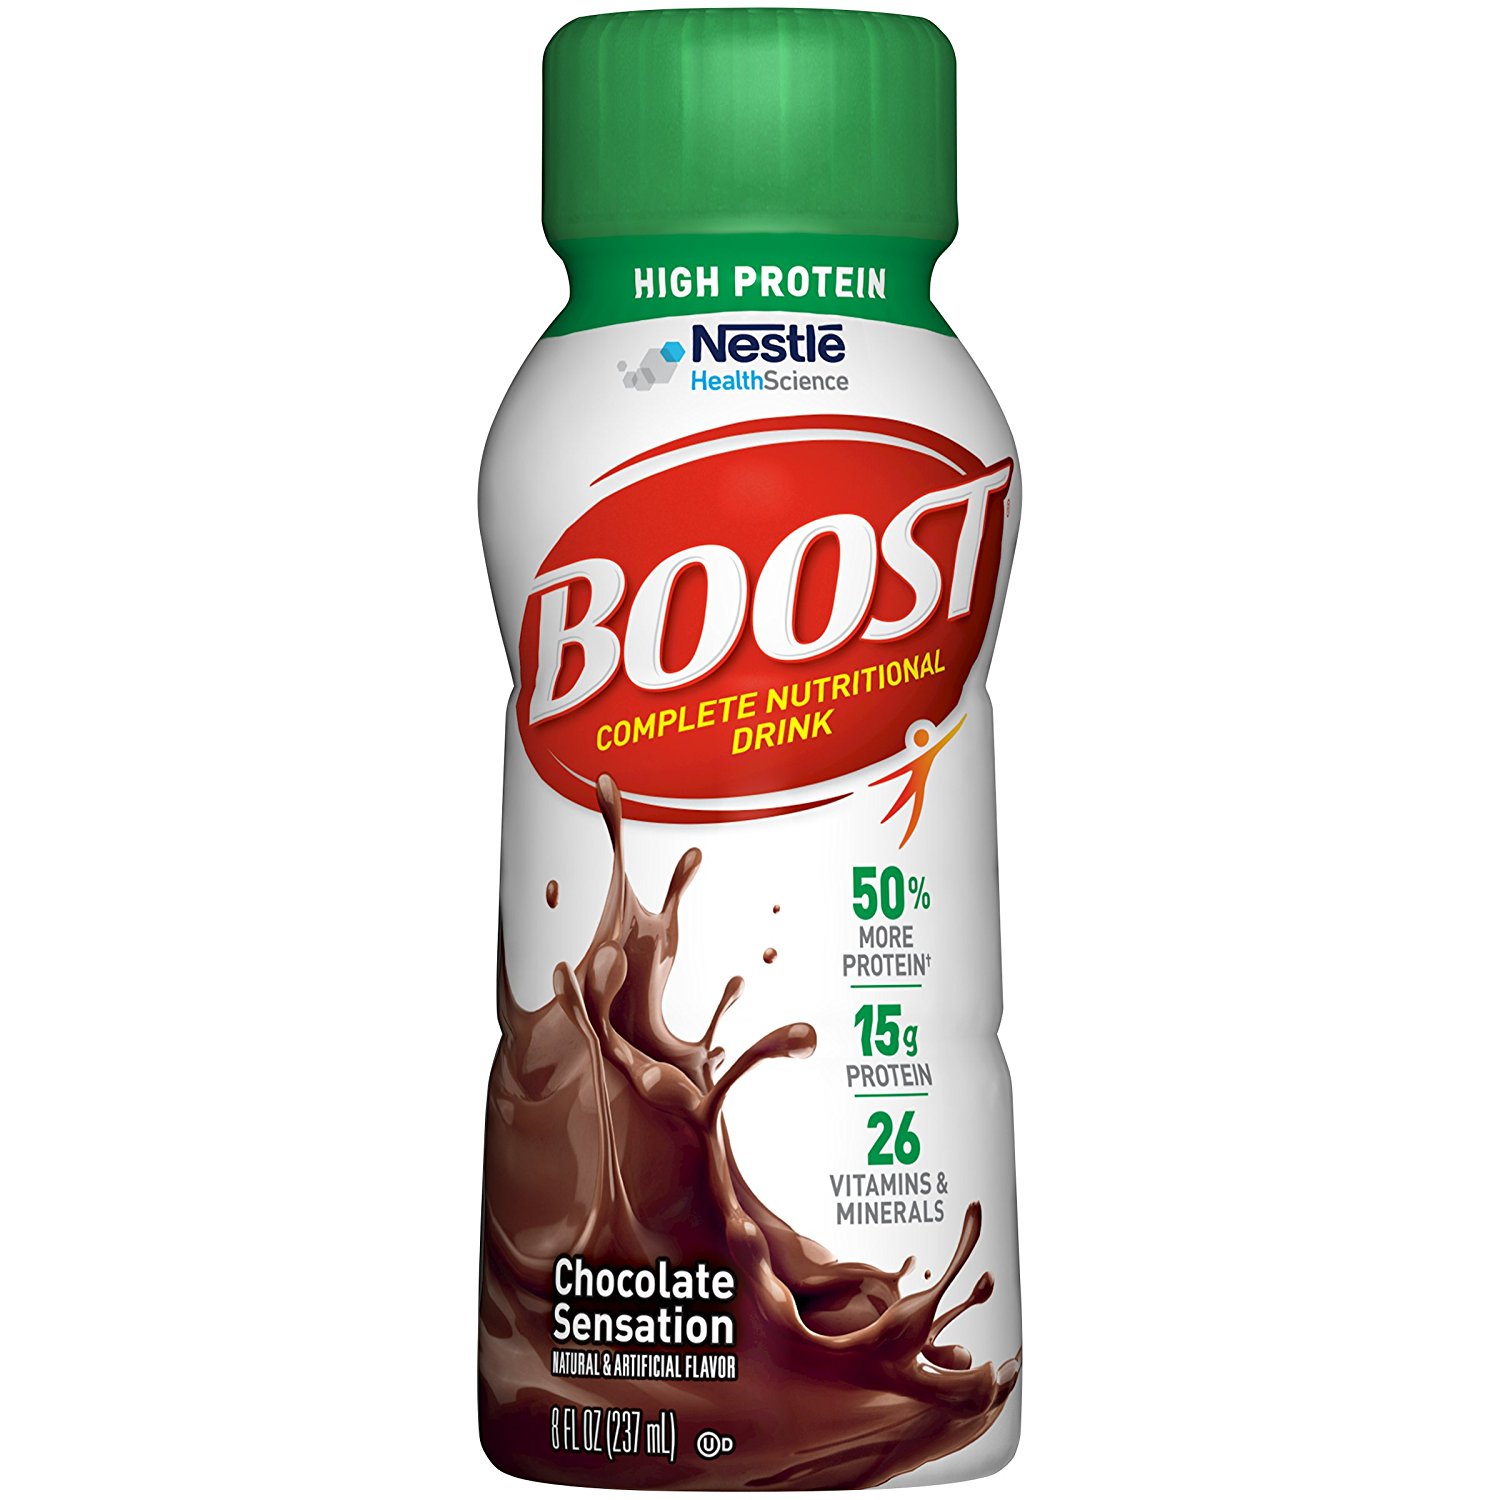 Boost High Protein Complete Nutritional Drink 24 Pack Only $16.58 Shipped!